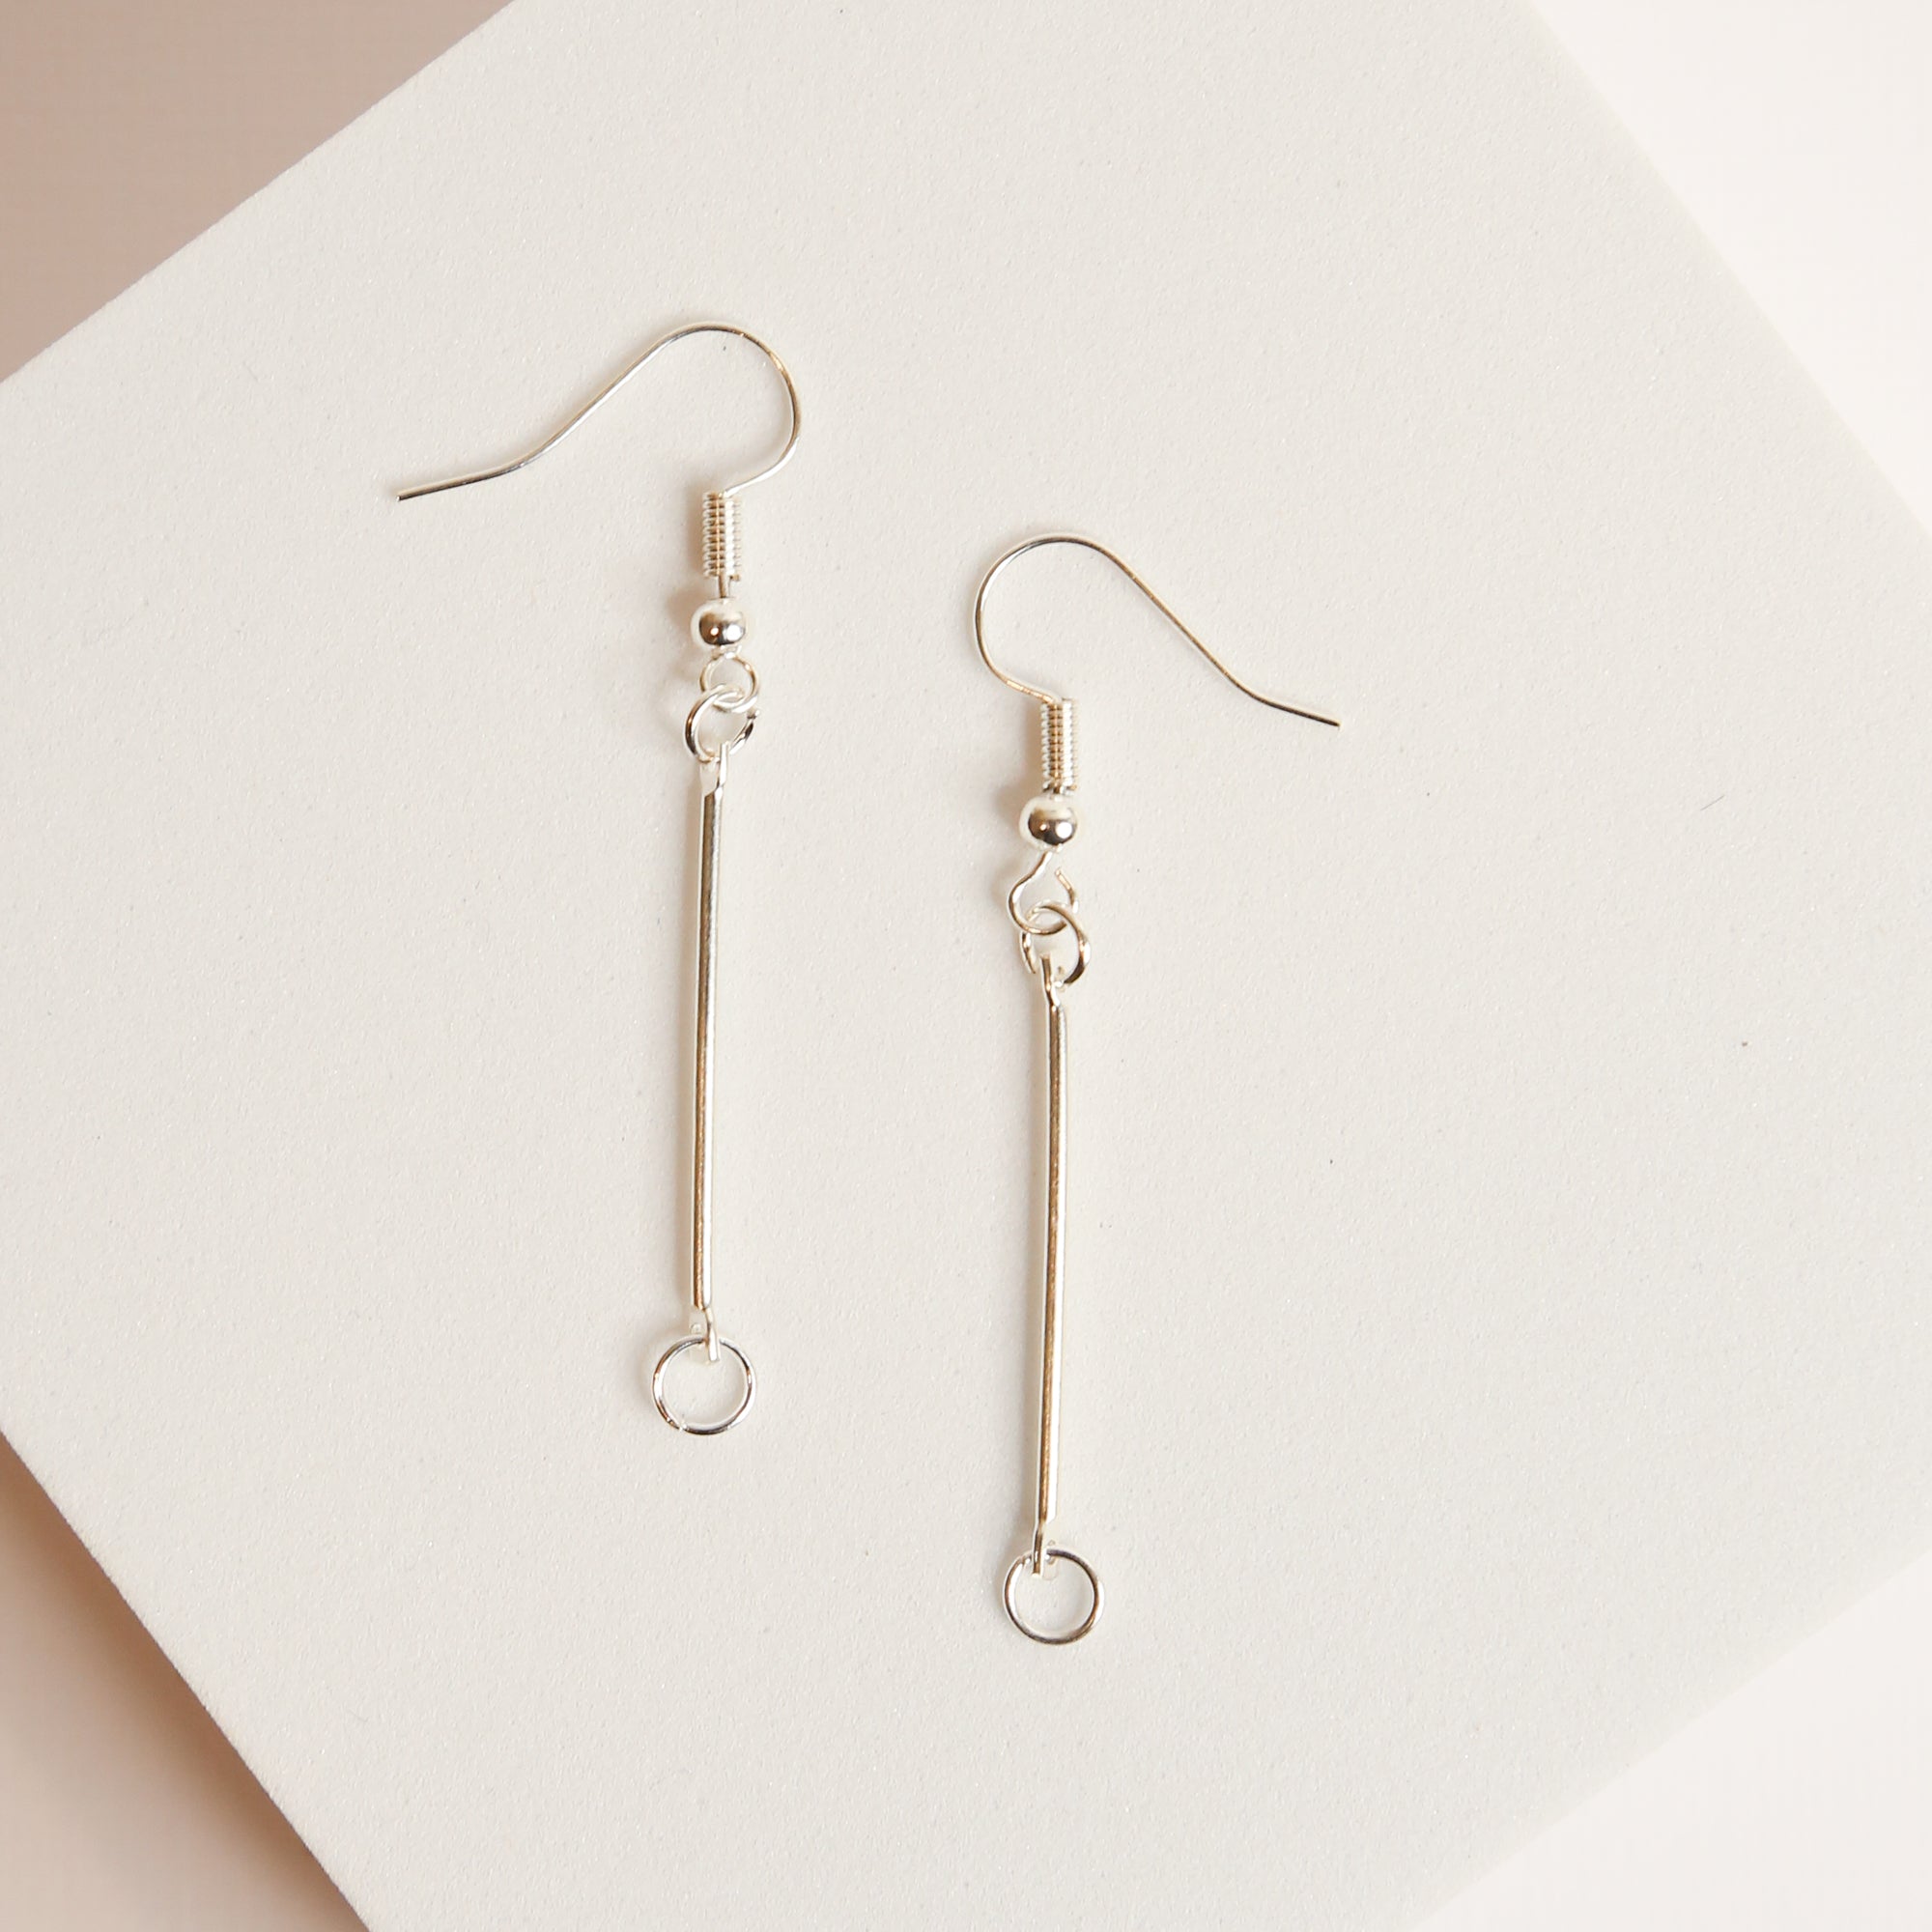 Earring Stick Drop with Hooks - 10 pieces